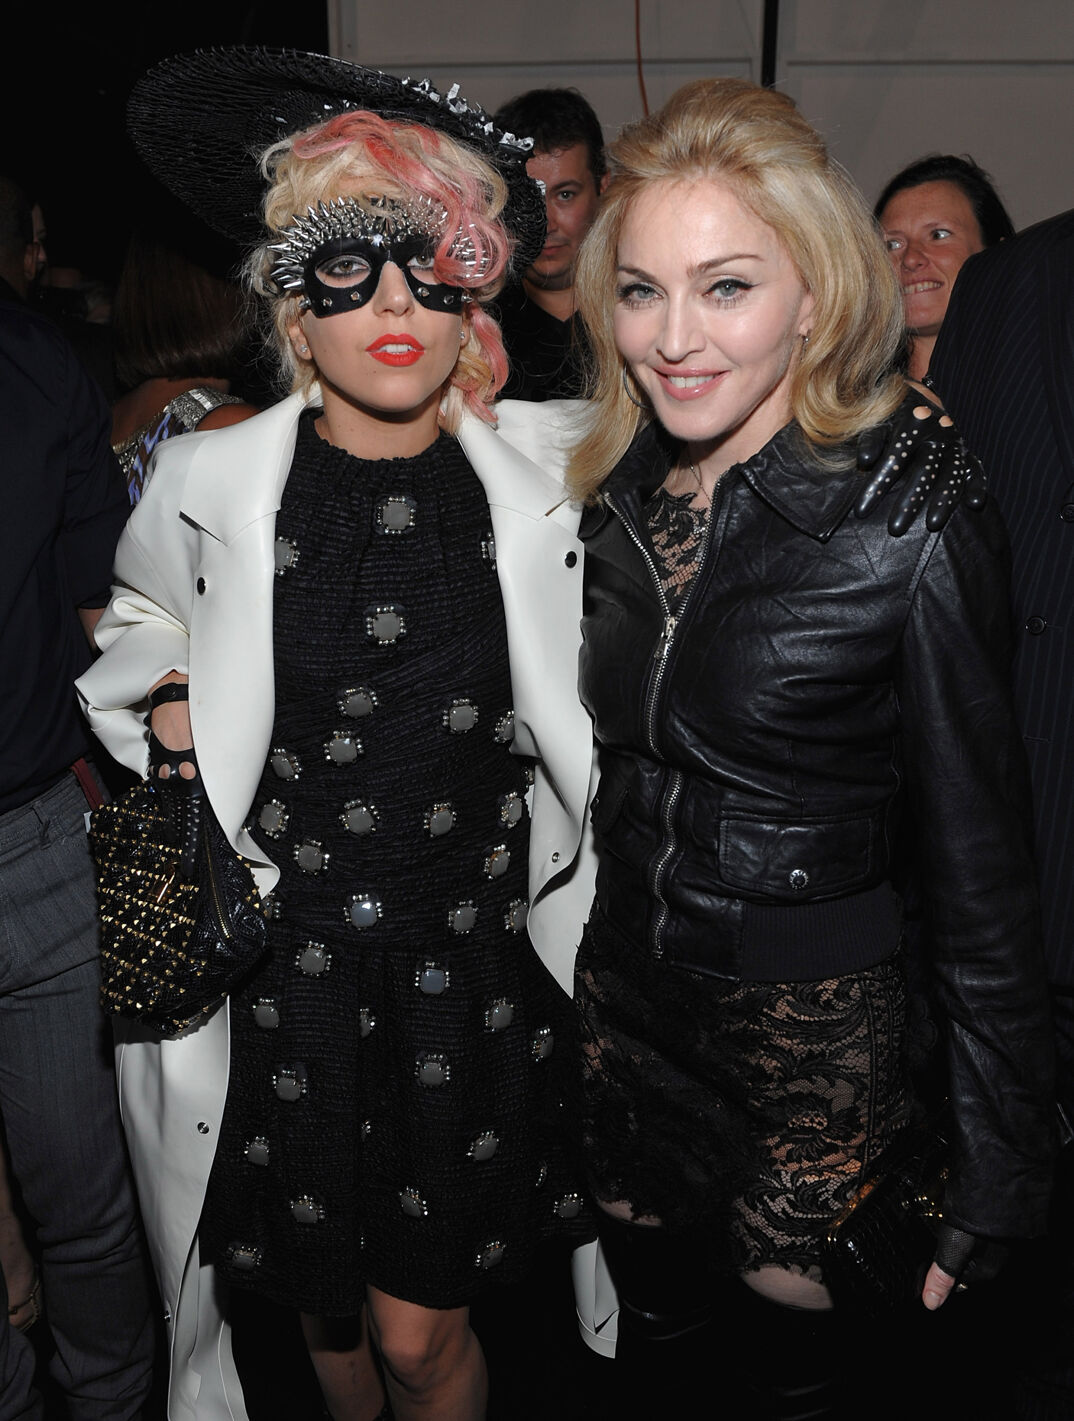 Lady Gaga, with pink-tipped bangs, wears a spiky metal mask around her eyes and leather gloves with her arm around Madonna, who smiles and wears a black leather jacket, at a 2009 fashion event. There's a crowd behind them.